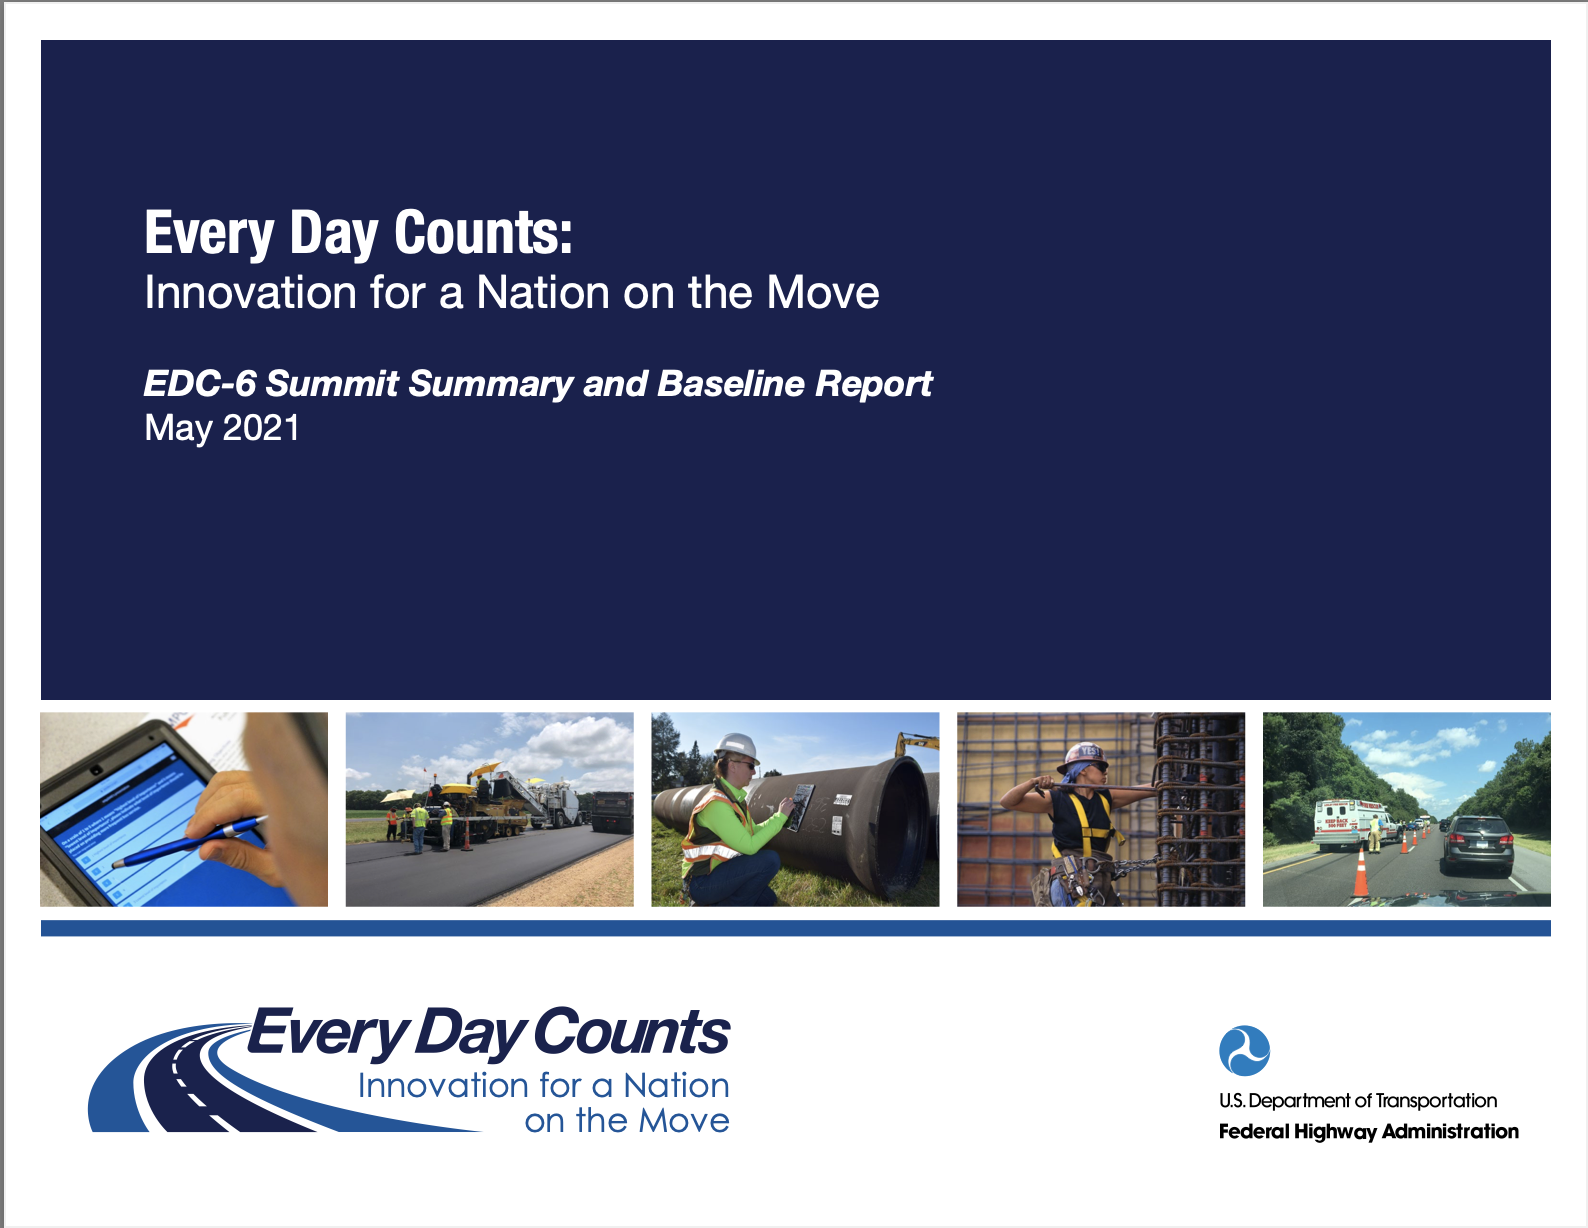 Image Reads: Every Day Counts, Innovation for a Nation on the Move, EDC-6 Summit Summary and Baseline Report, May 2021